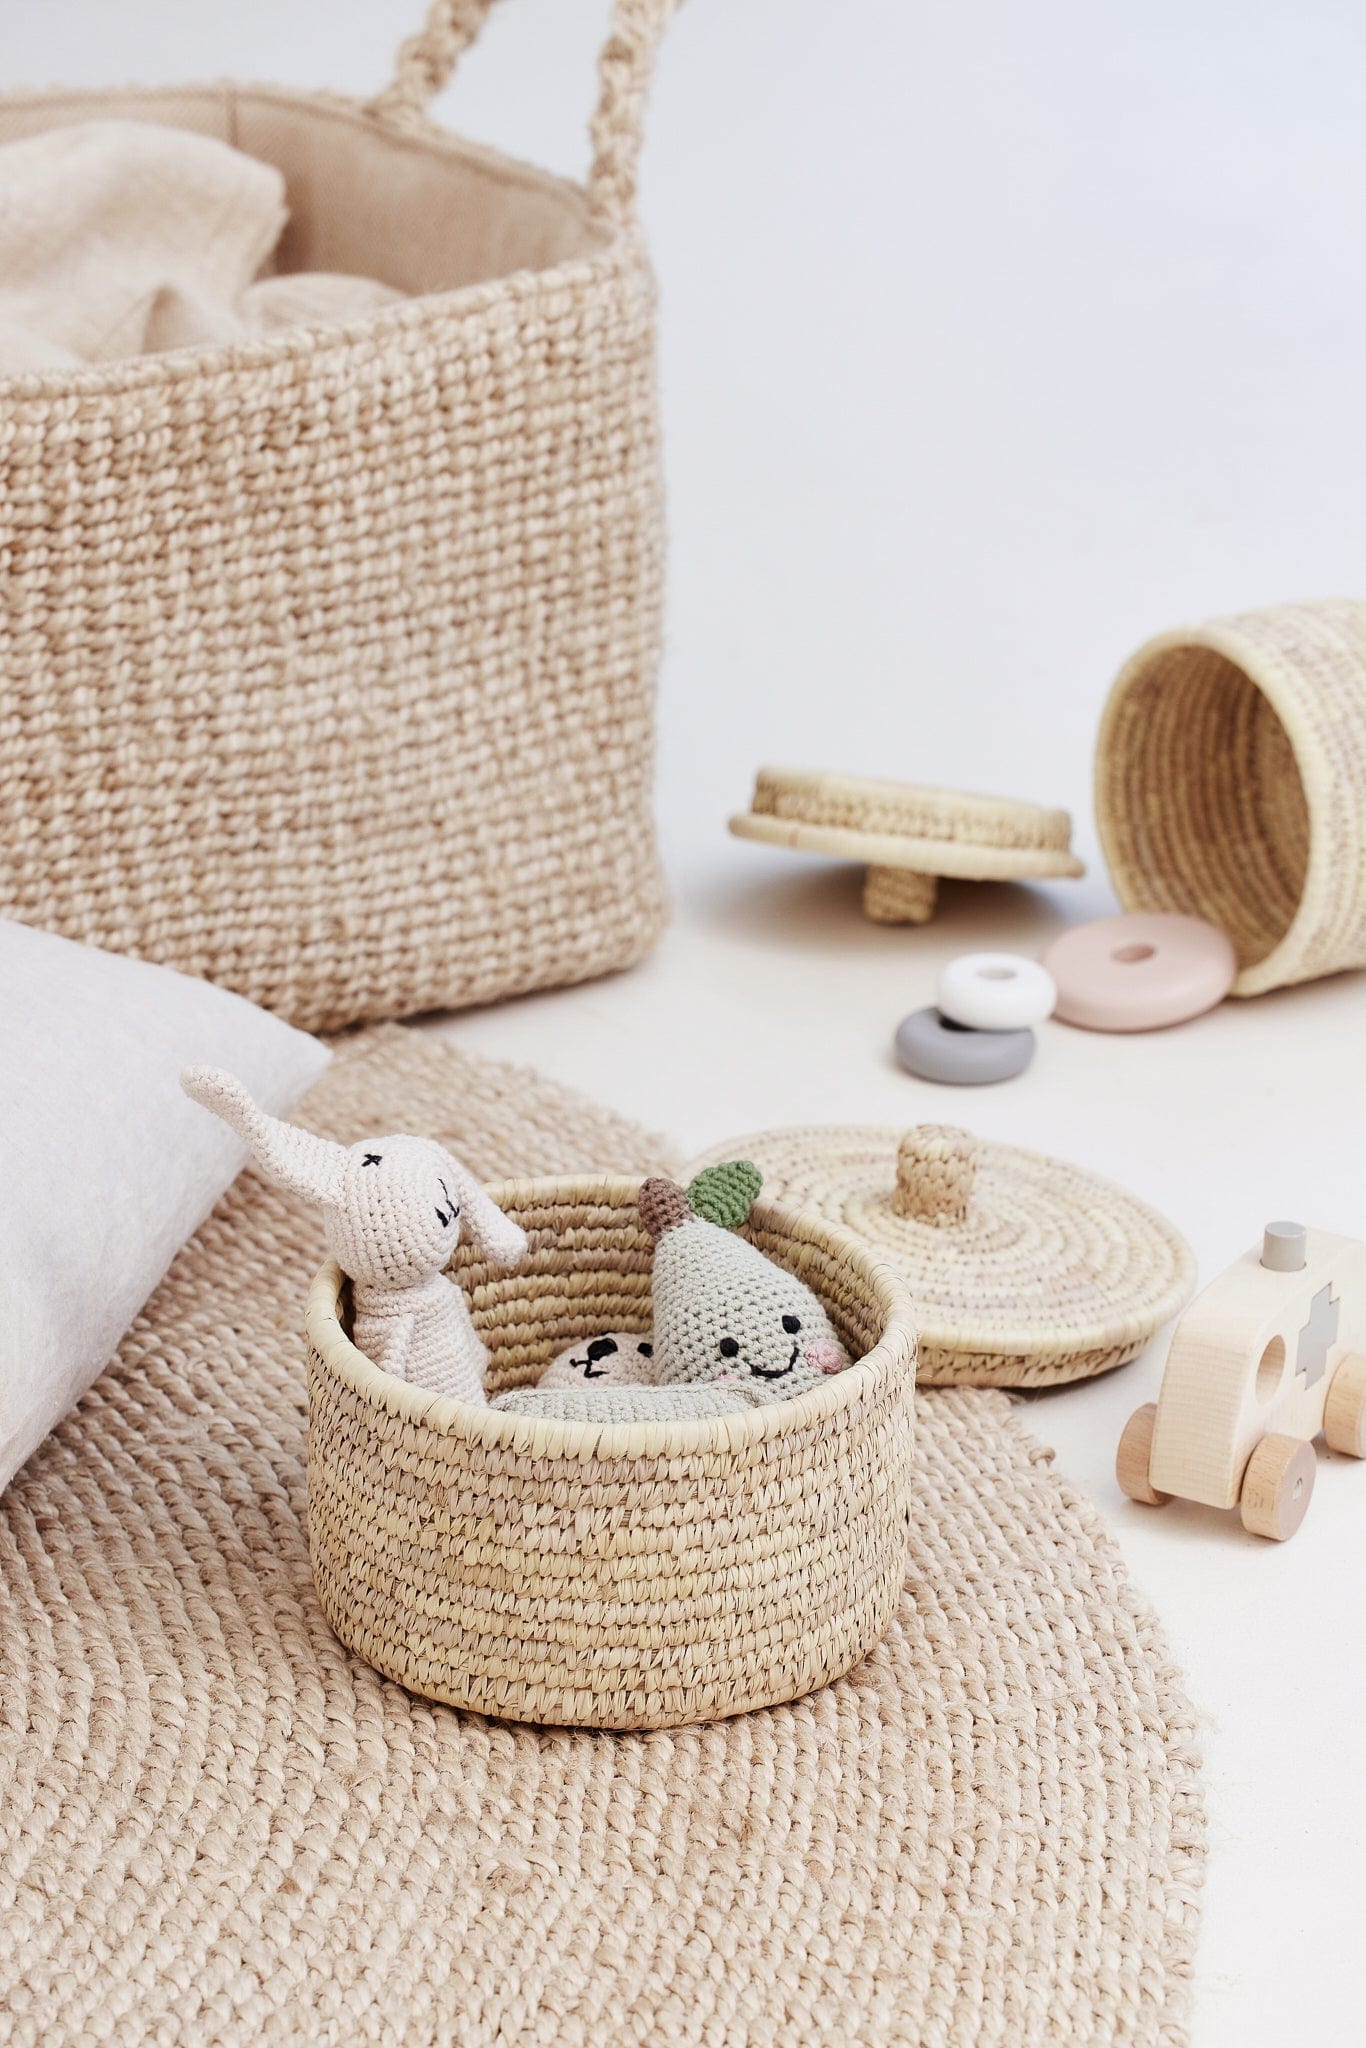 small palm leaf basket with children's toys on jute rug